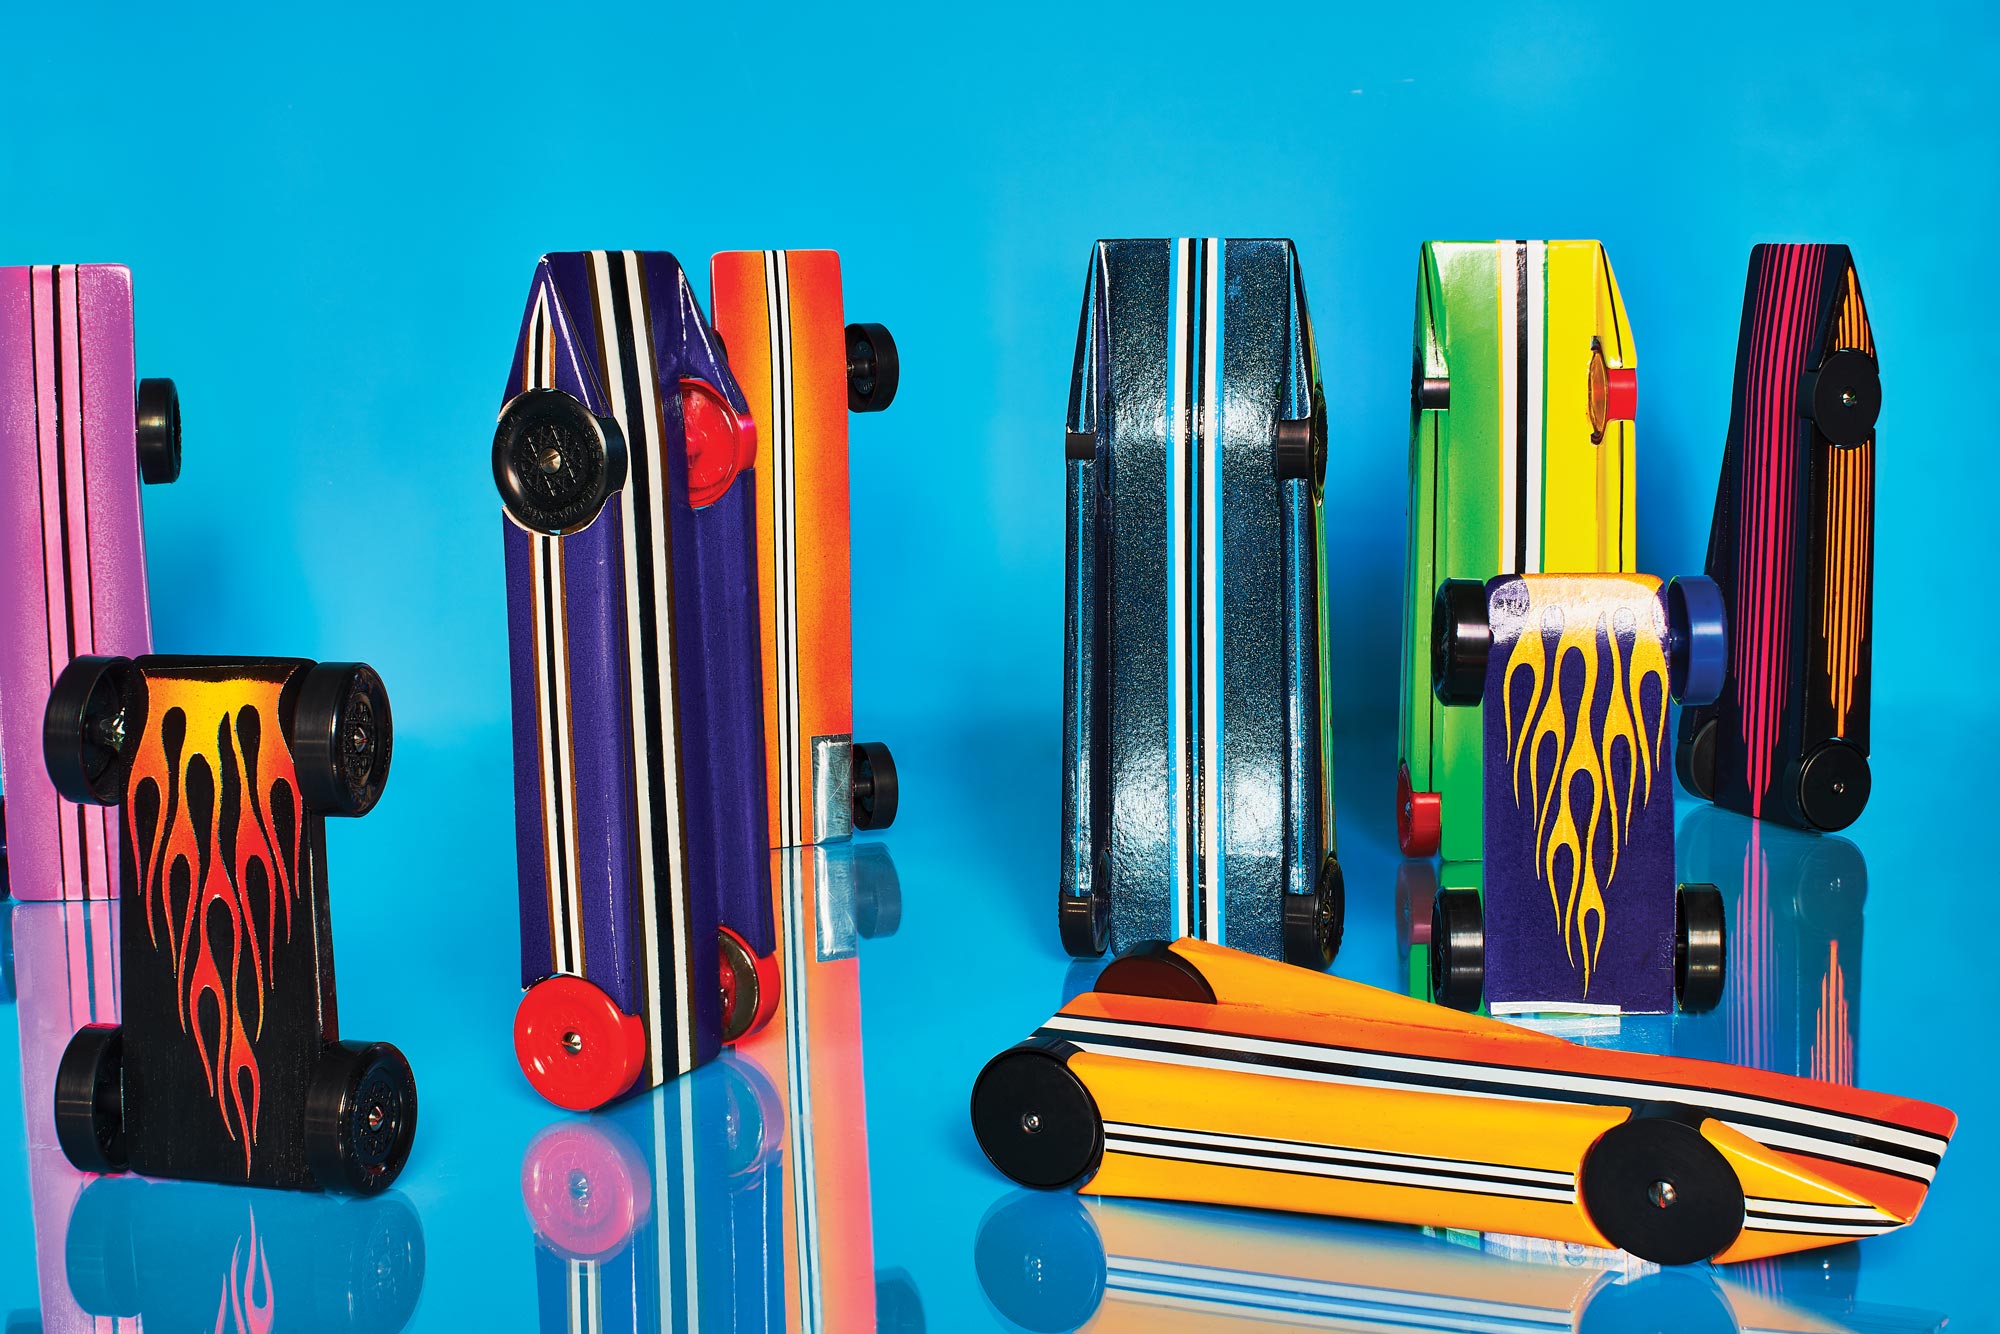 Meet the dads who can’t quit pinewood derby racing—even after their kids are over it